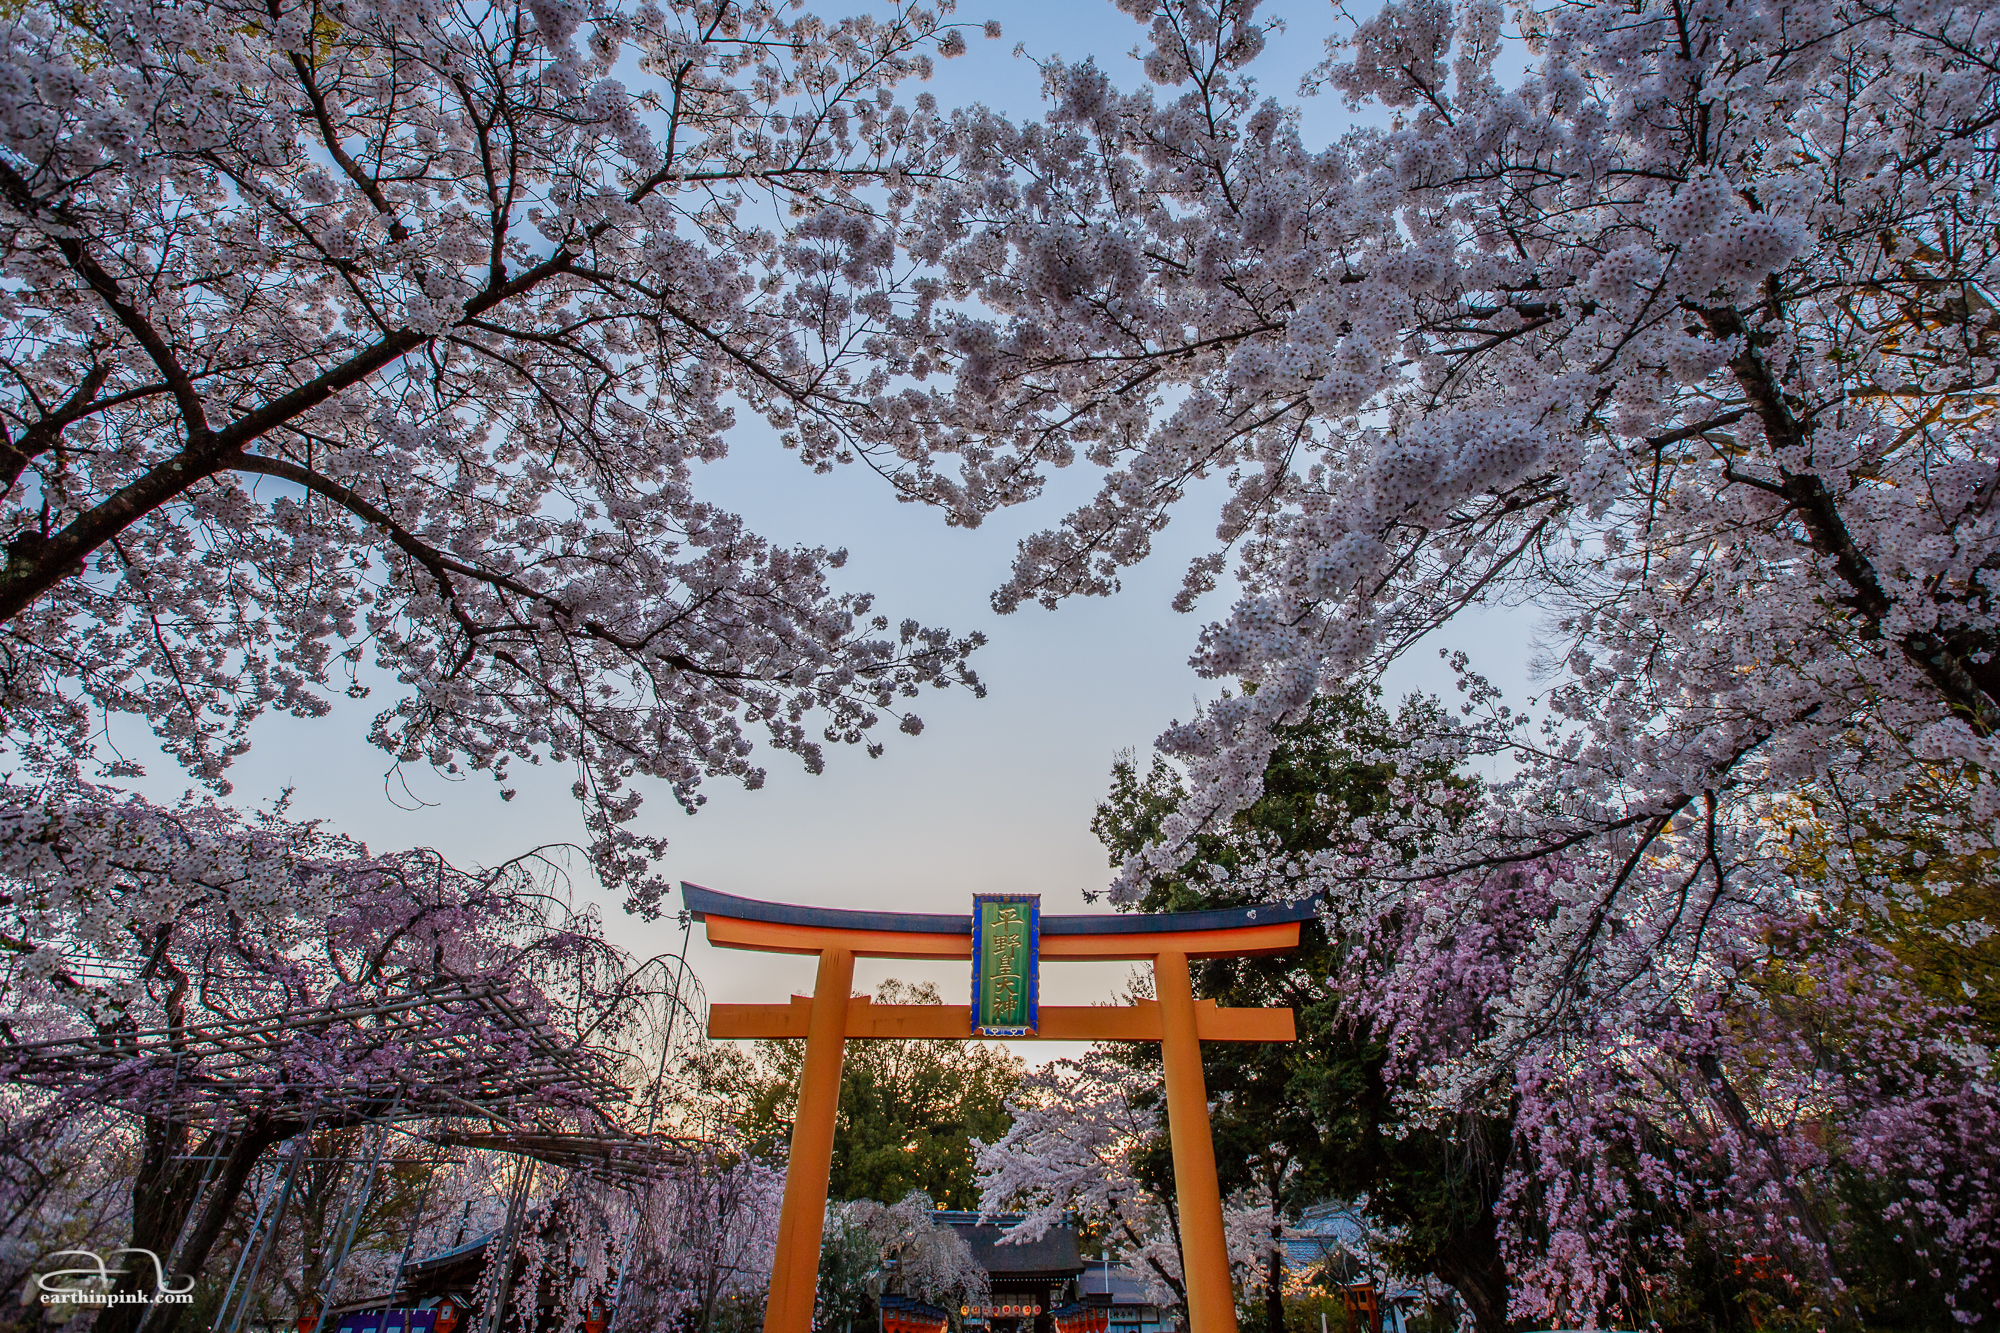 The torii gate at the entrance of Hirano shrine, surrounded by cherry blossoms.